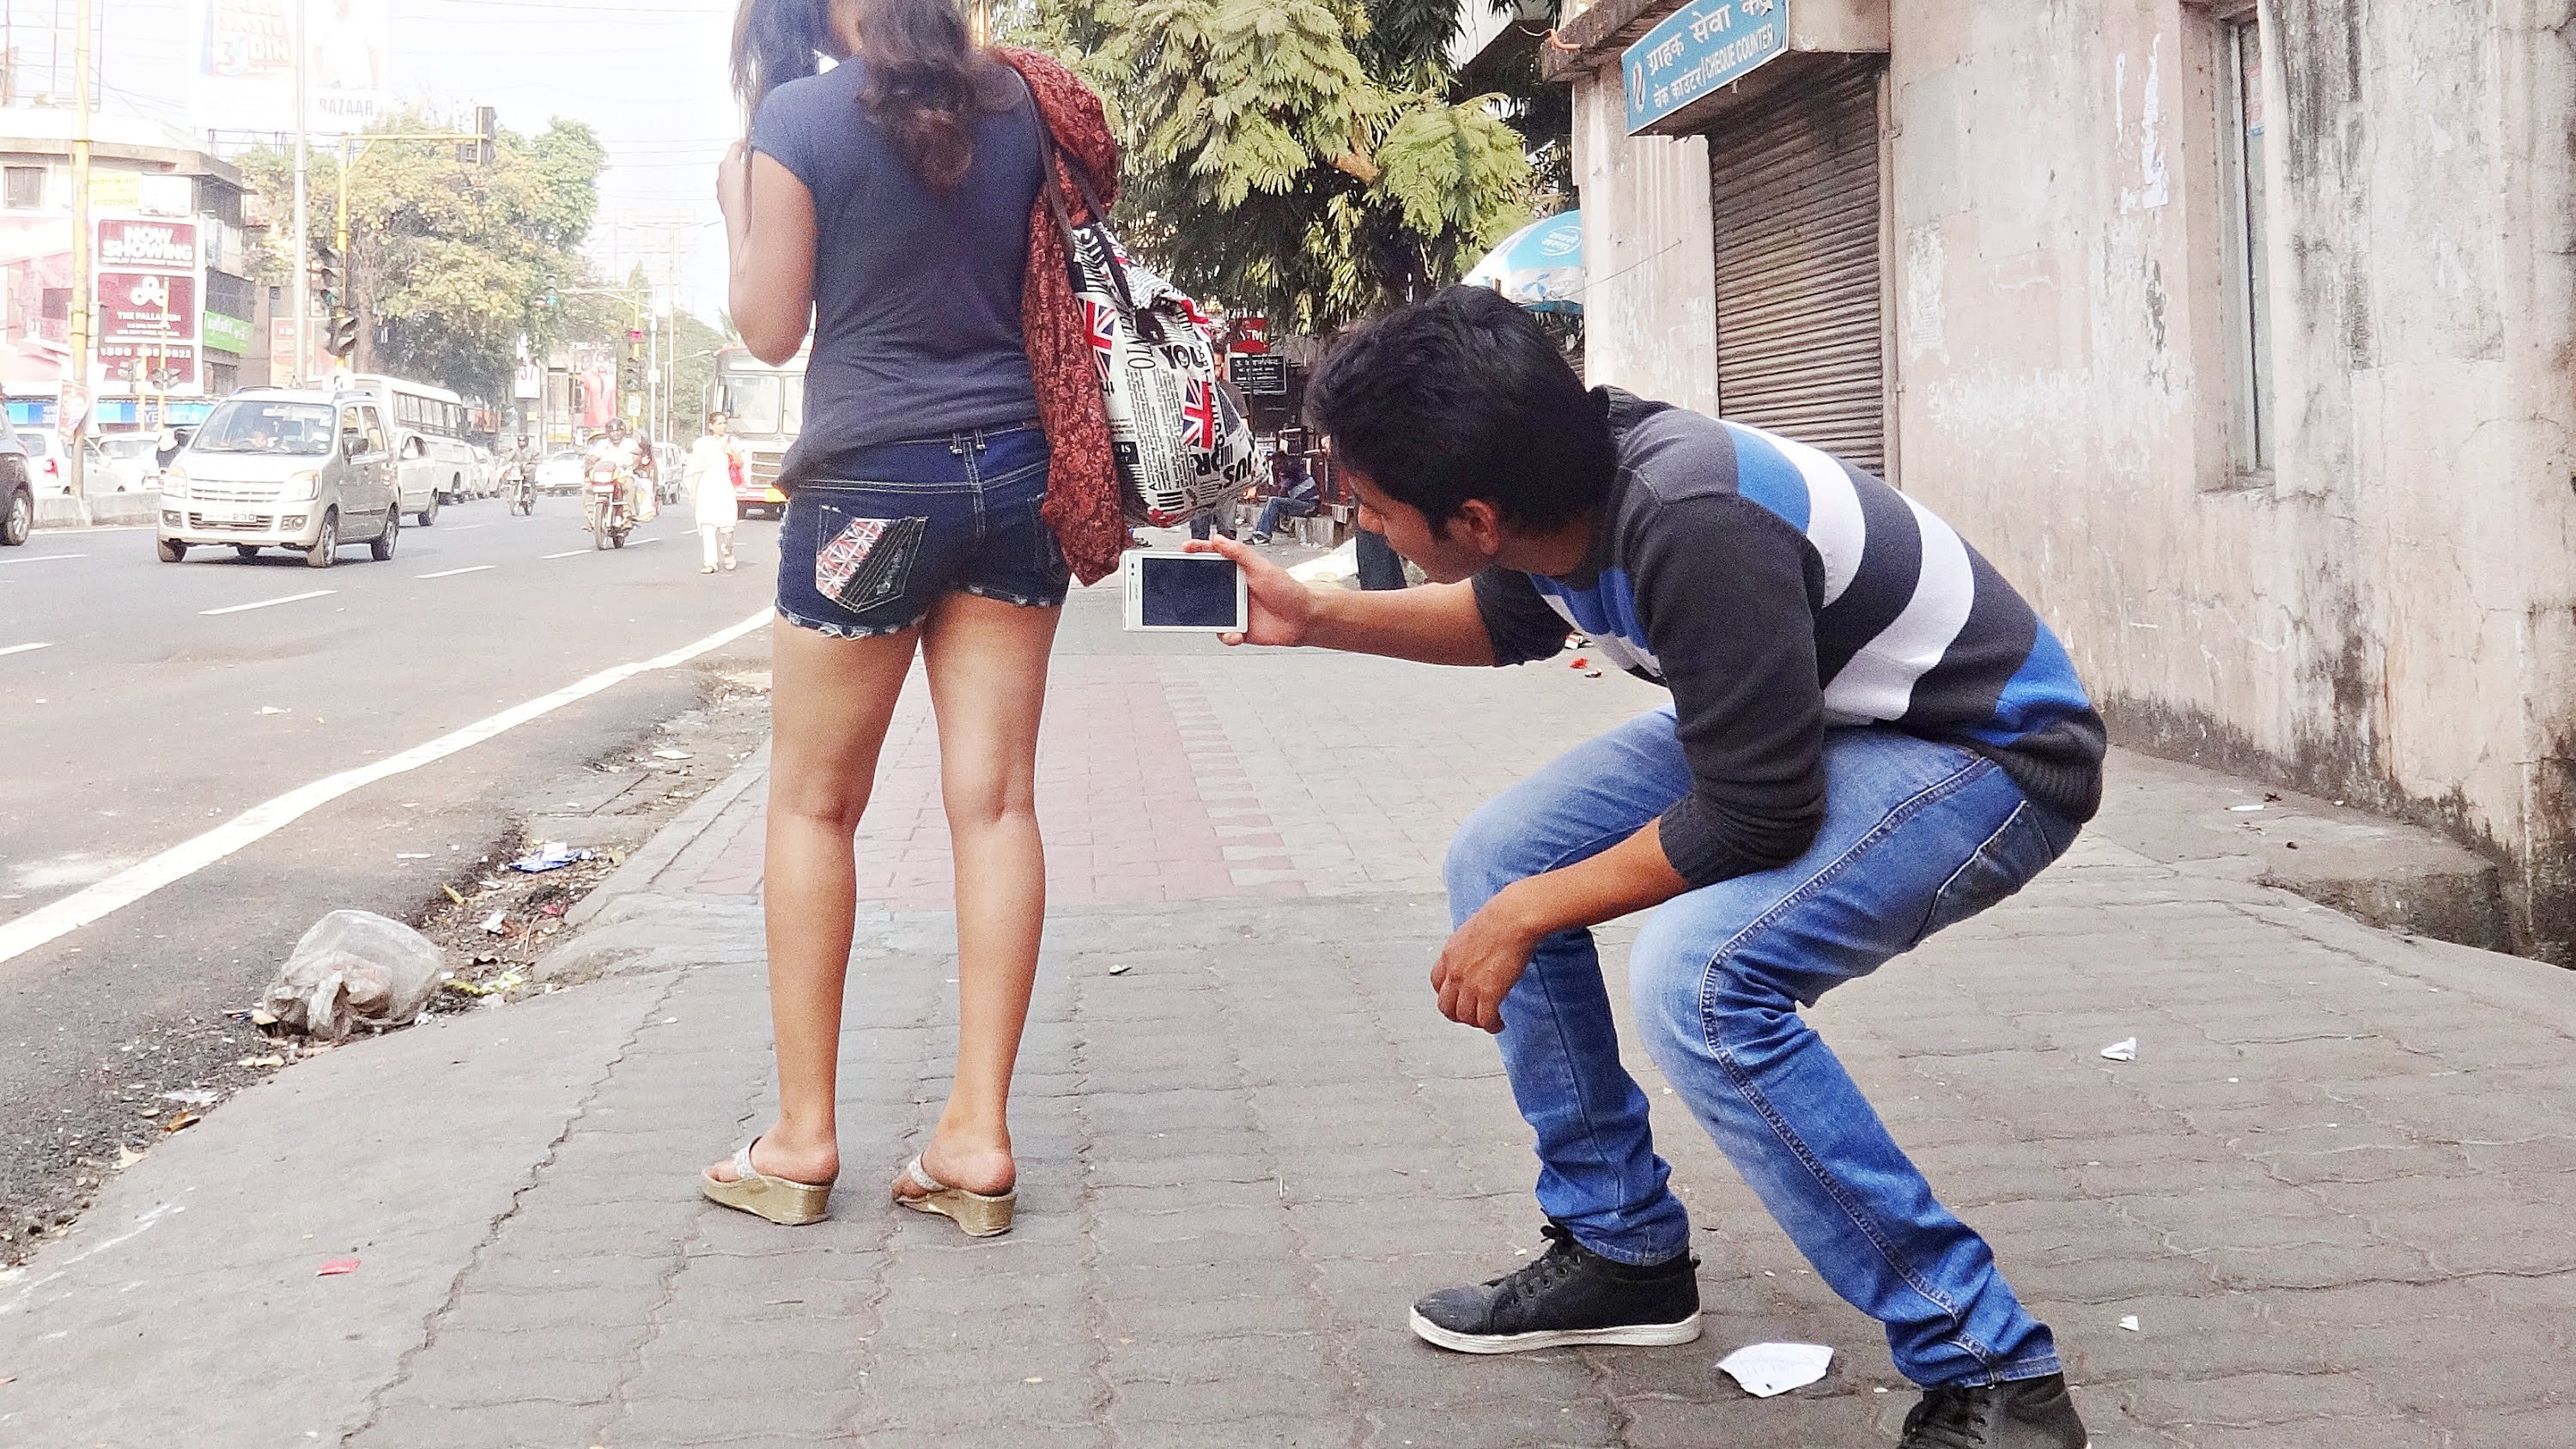 To All The Girls Who Like Wearing Short Clothes, Please Stop - ScoopWhoop